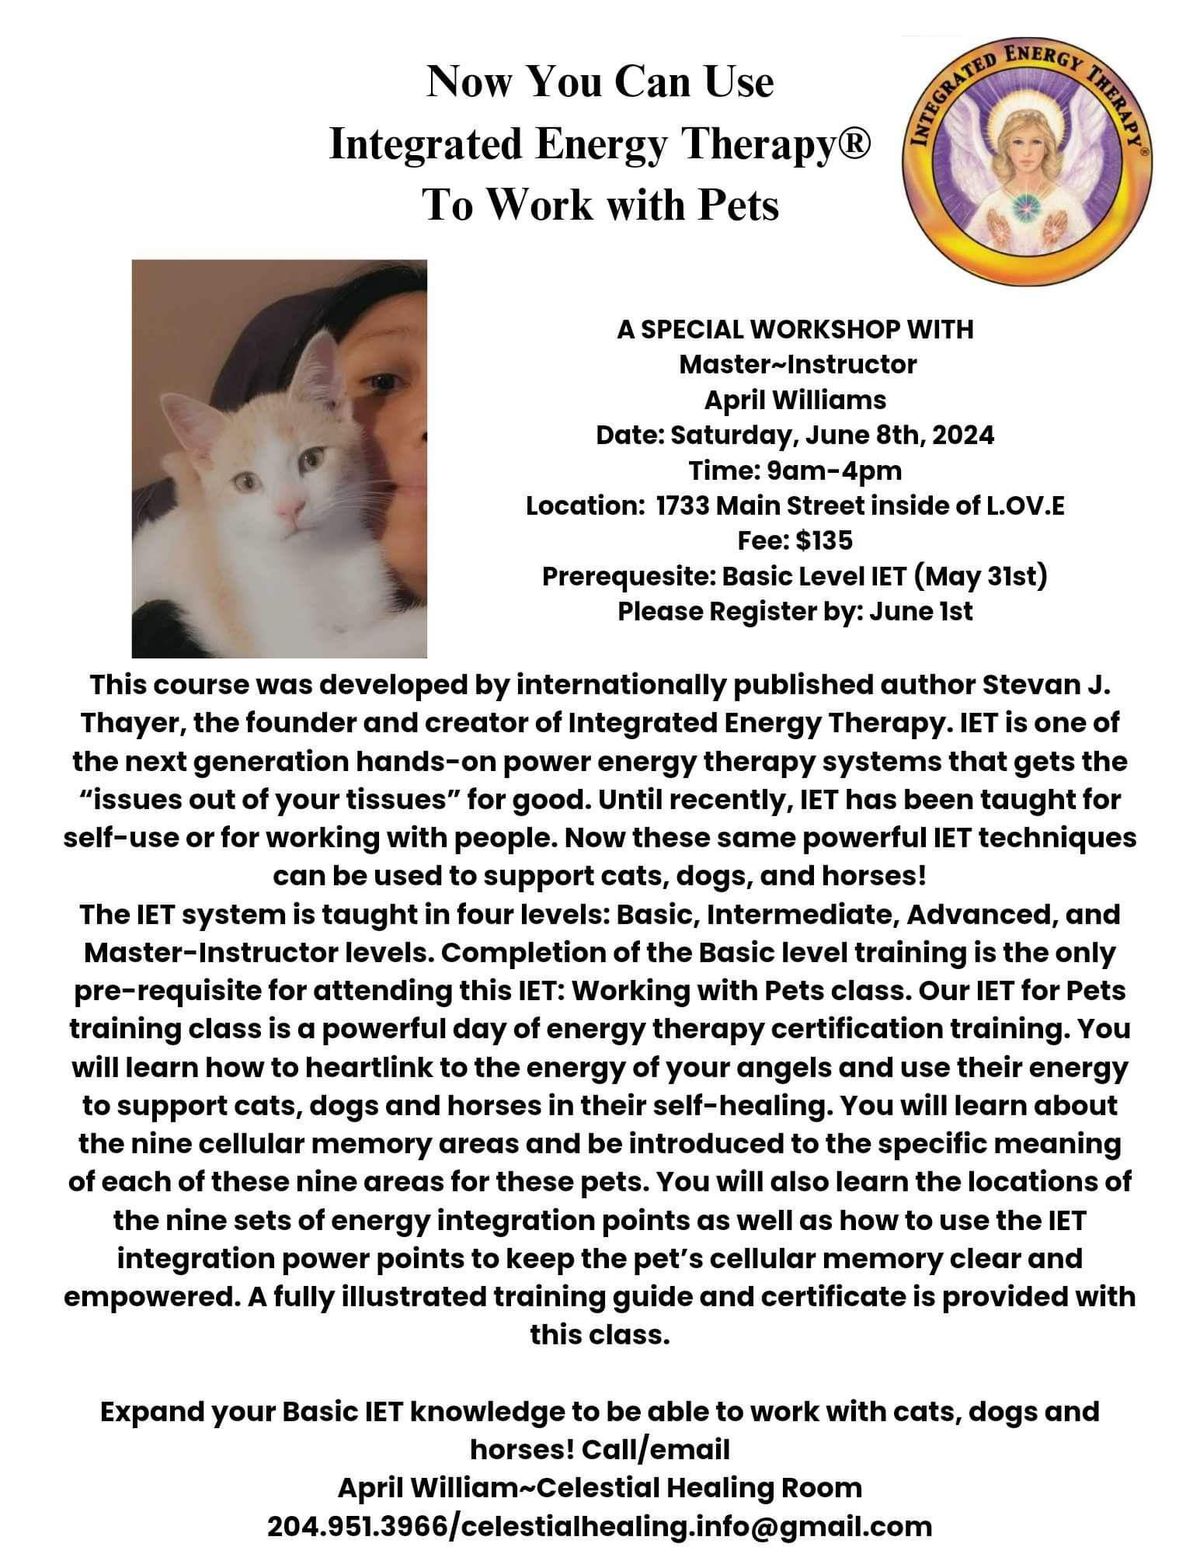 Integrated Energy Therapy and Your Pets